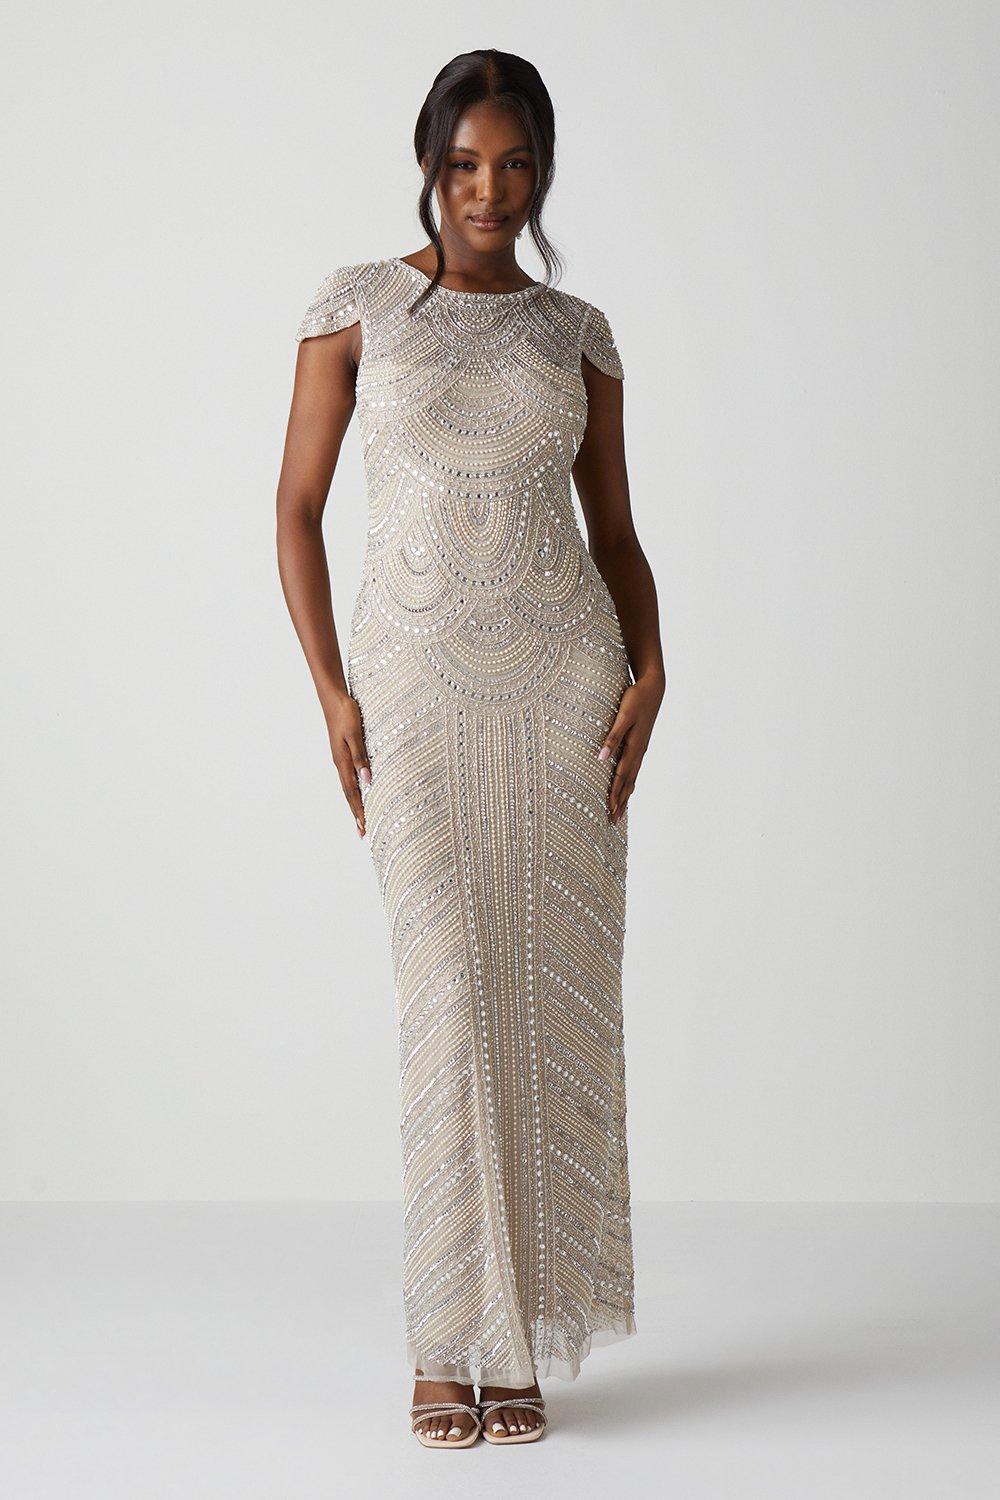 Beaded and Pearl Embellished Cap Sleeve Maxi Dress - Champagne